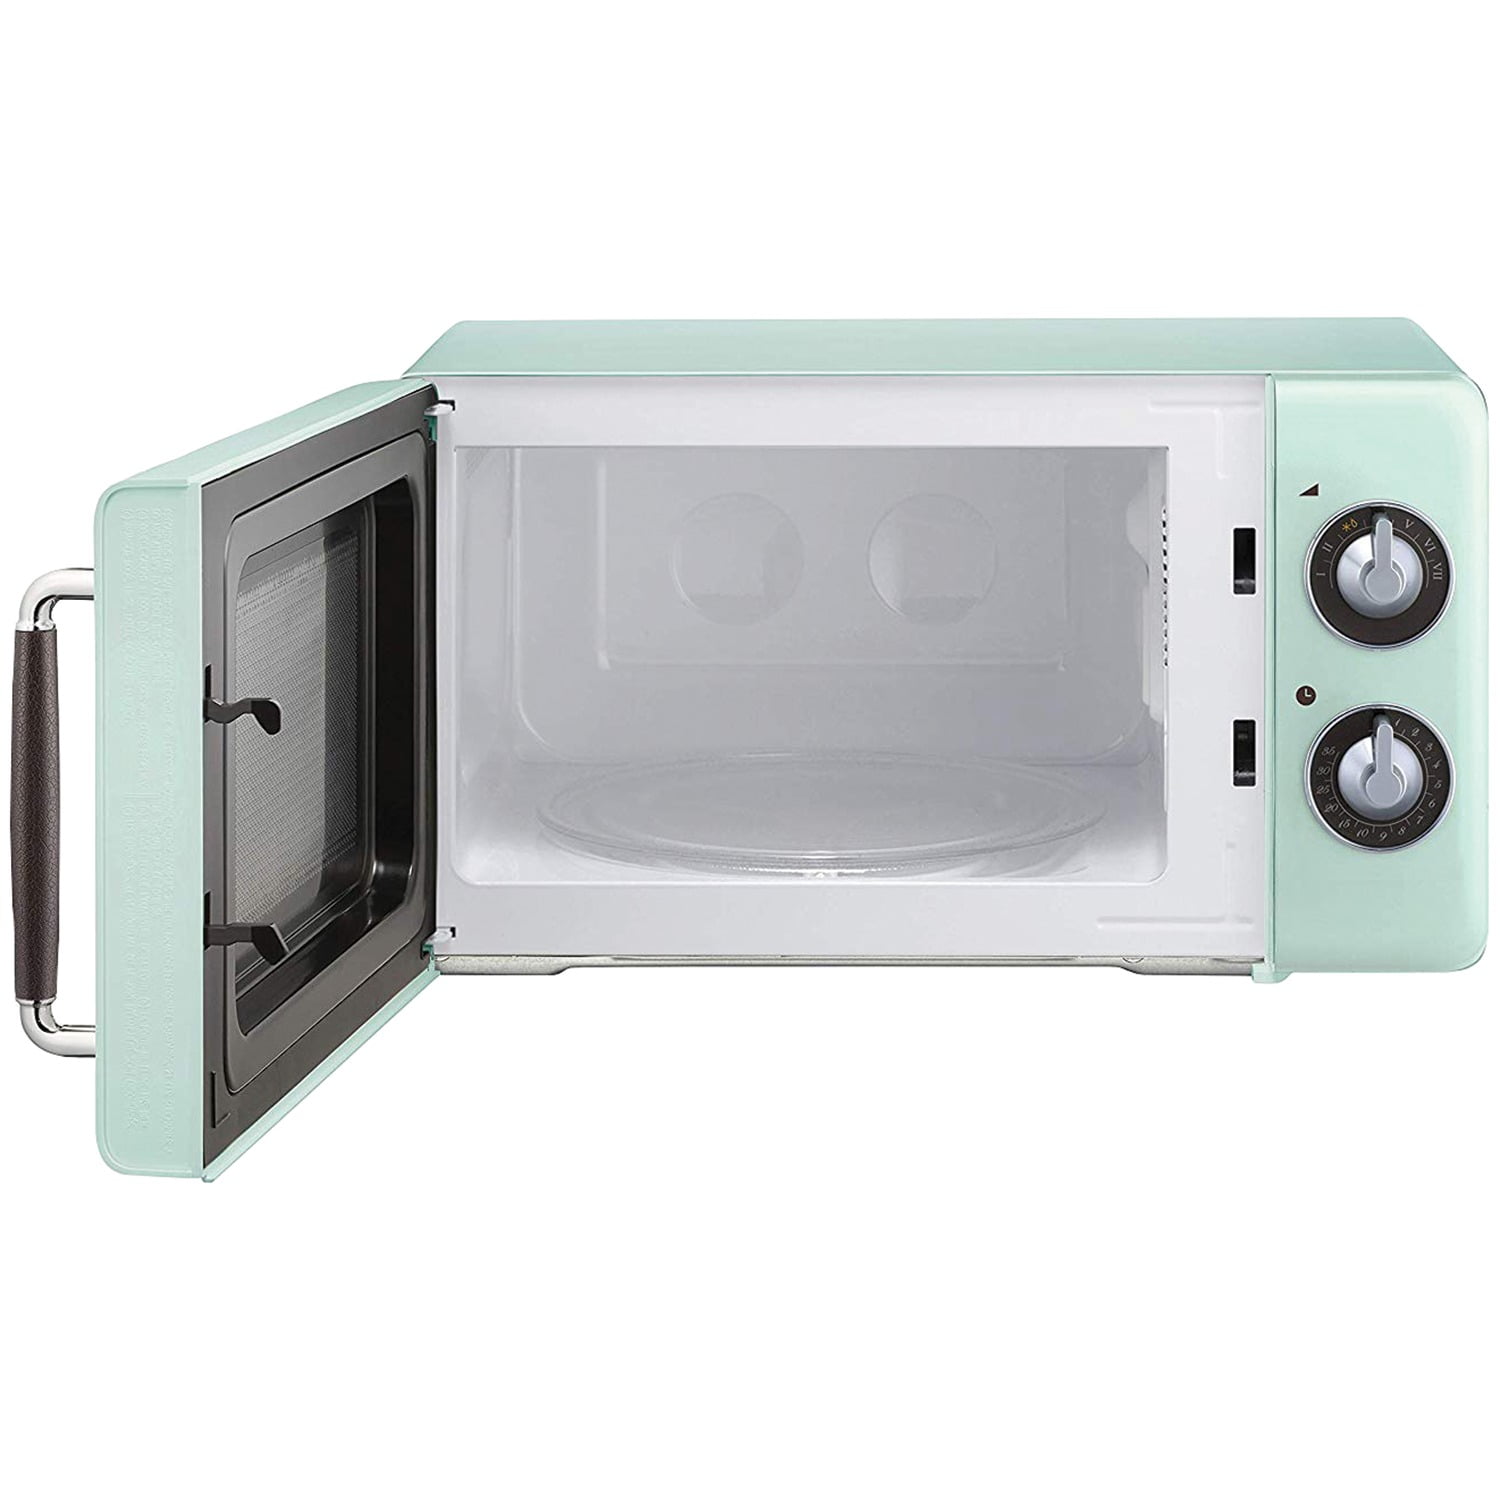 A microwave oven that's not too big, not too small, just right: My new  Kenmore 72122 - Retro Renovation